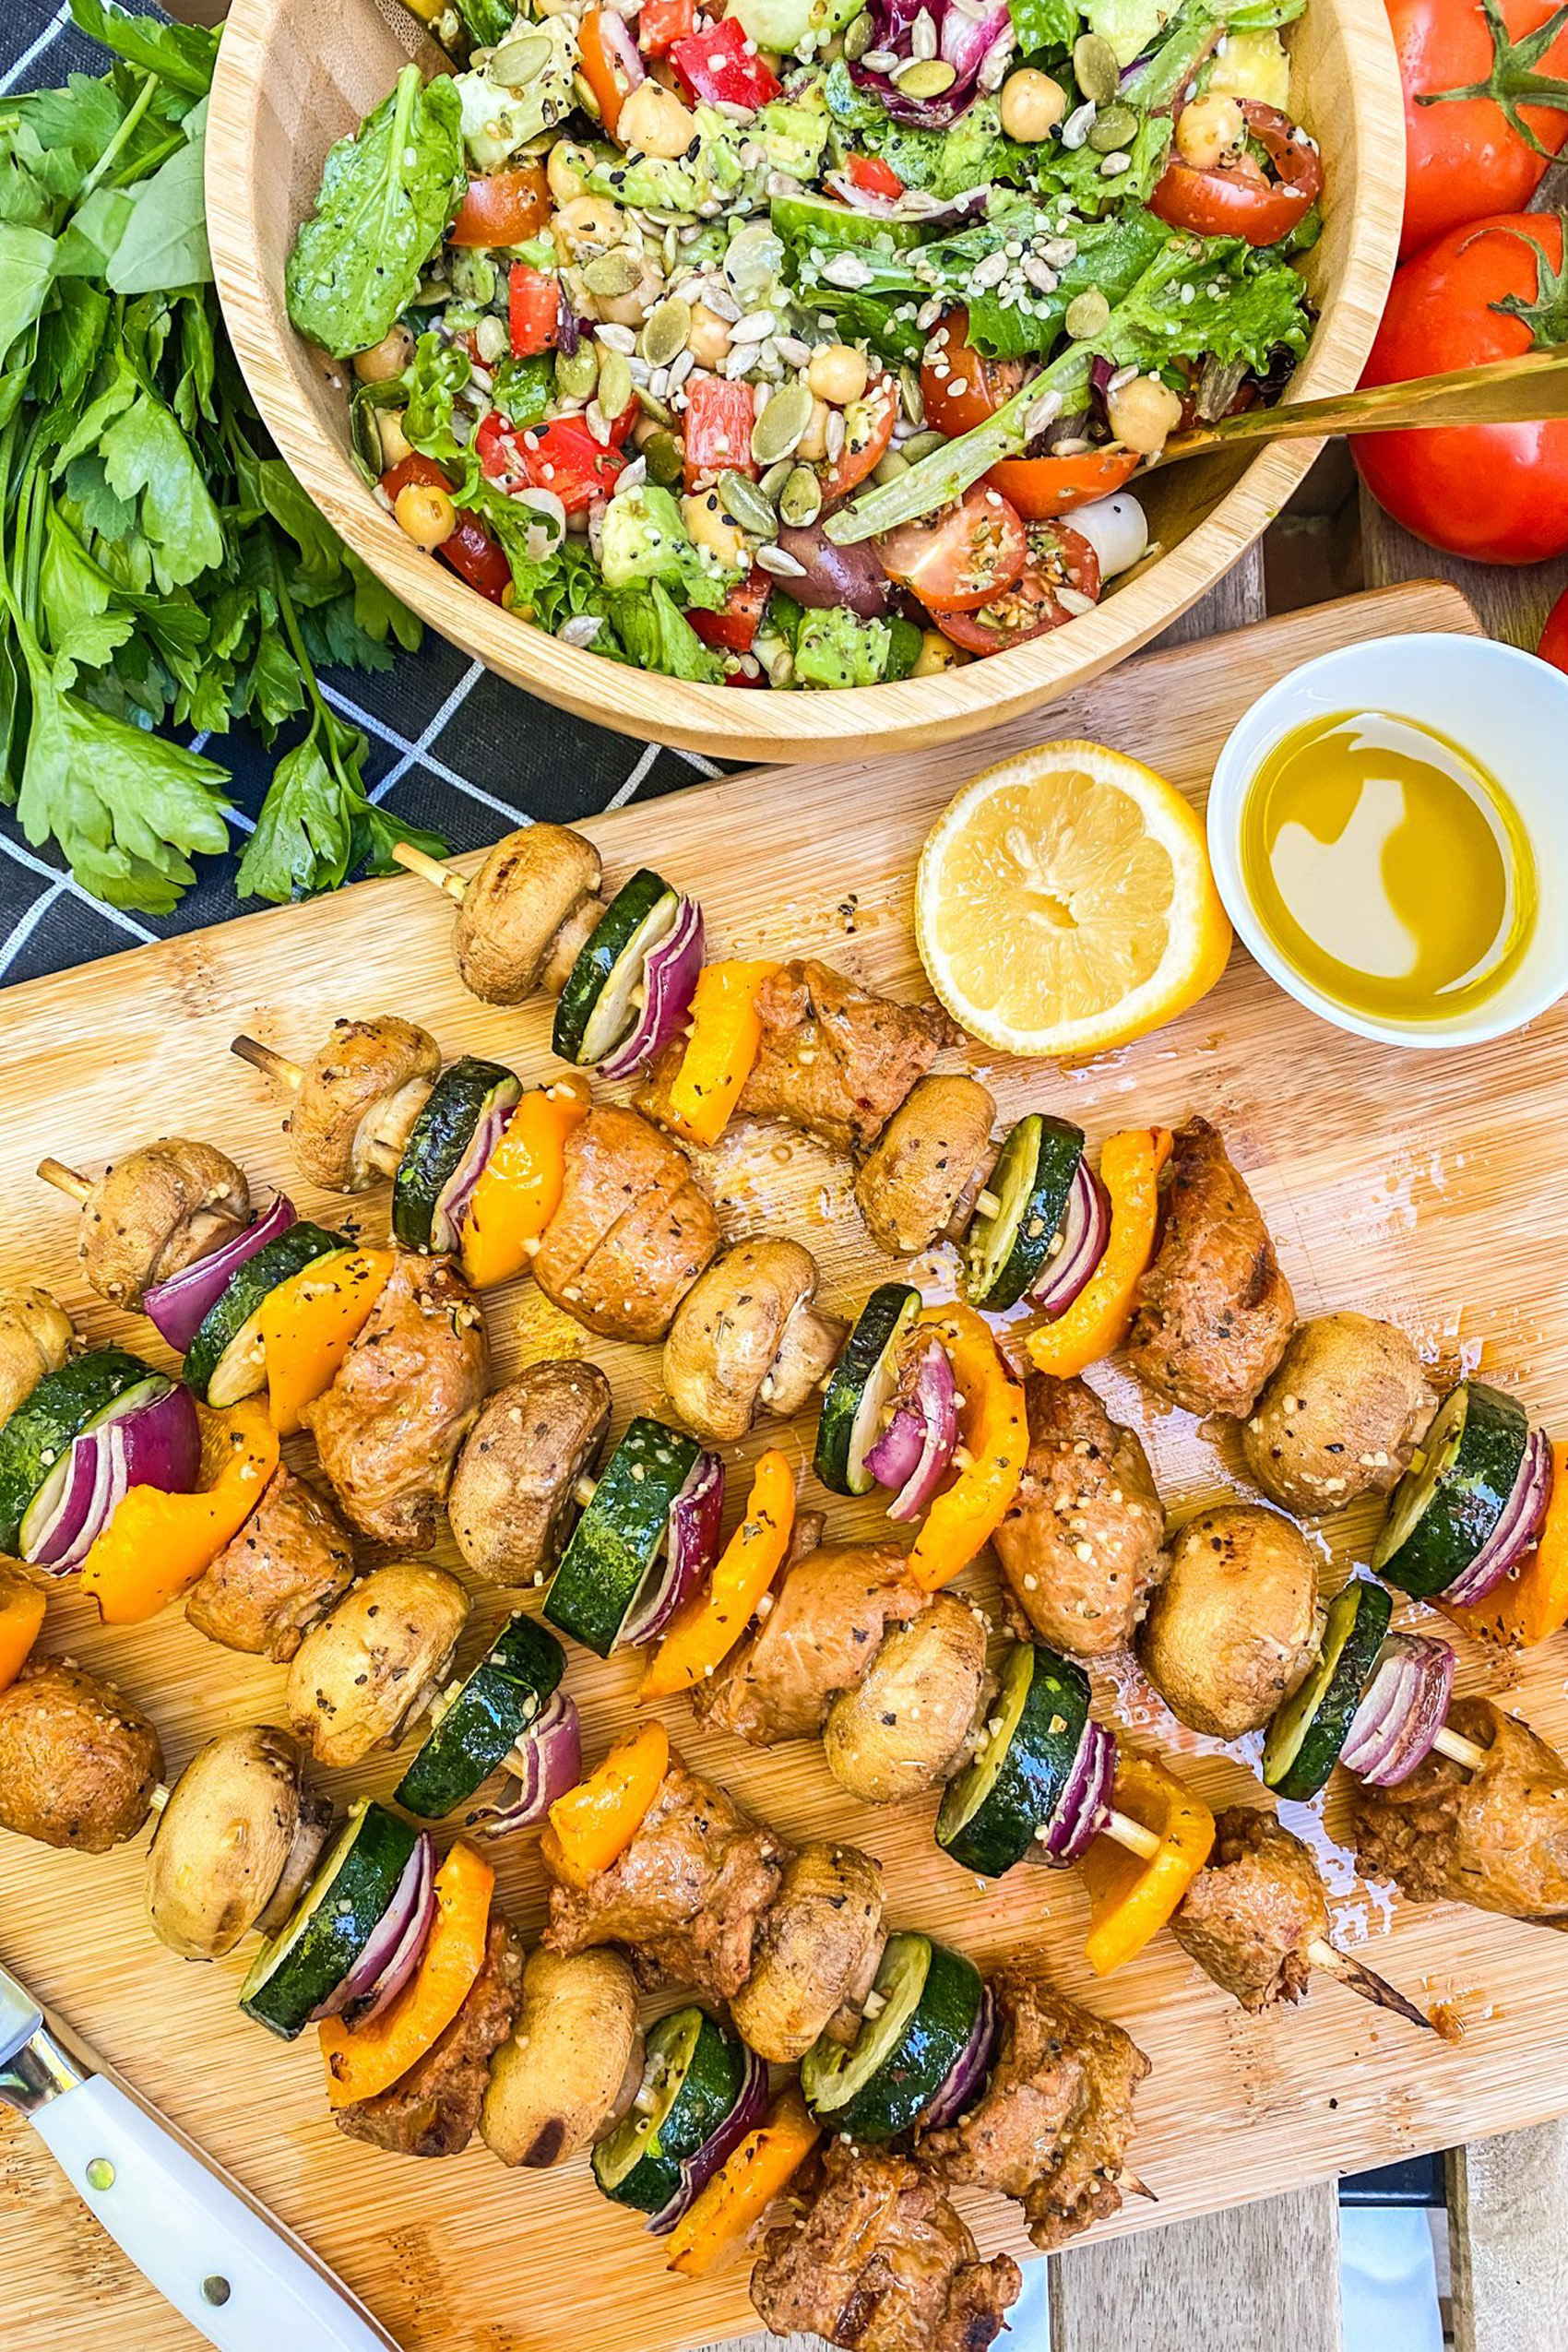 a cutting board holding grilled vegetable skewers served with lemon and dressing